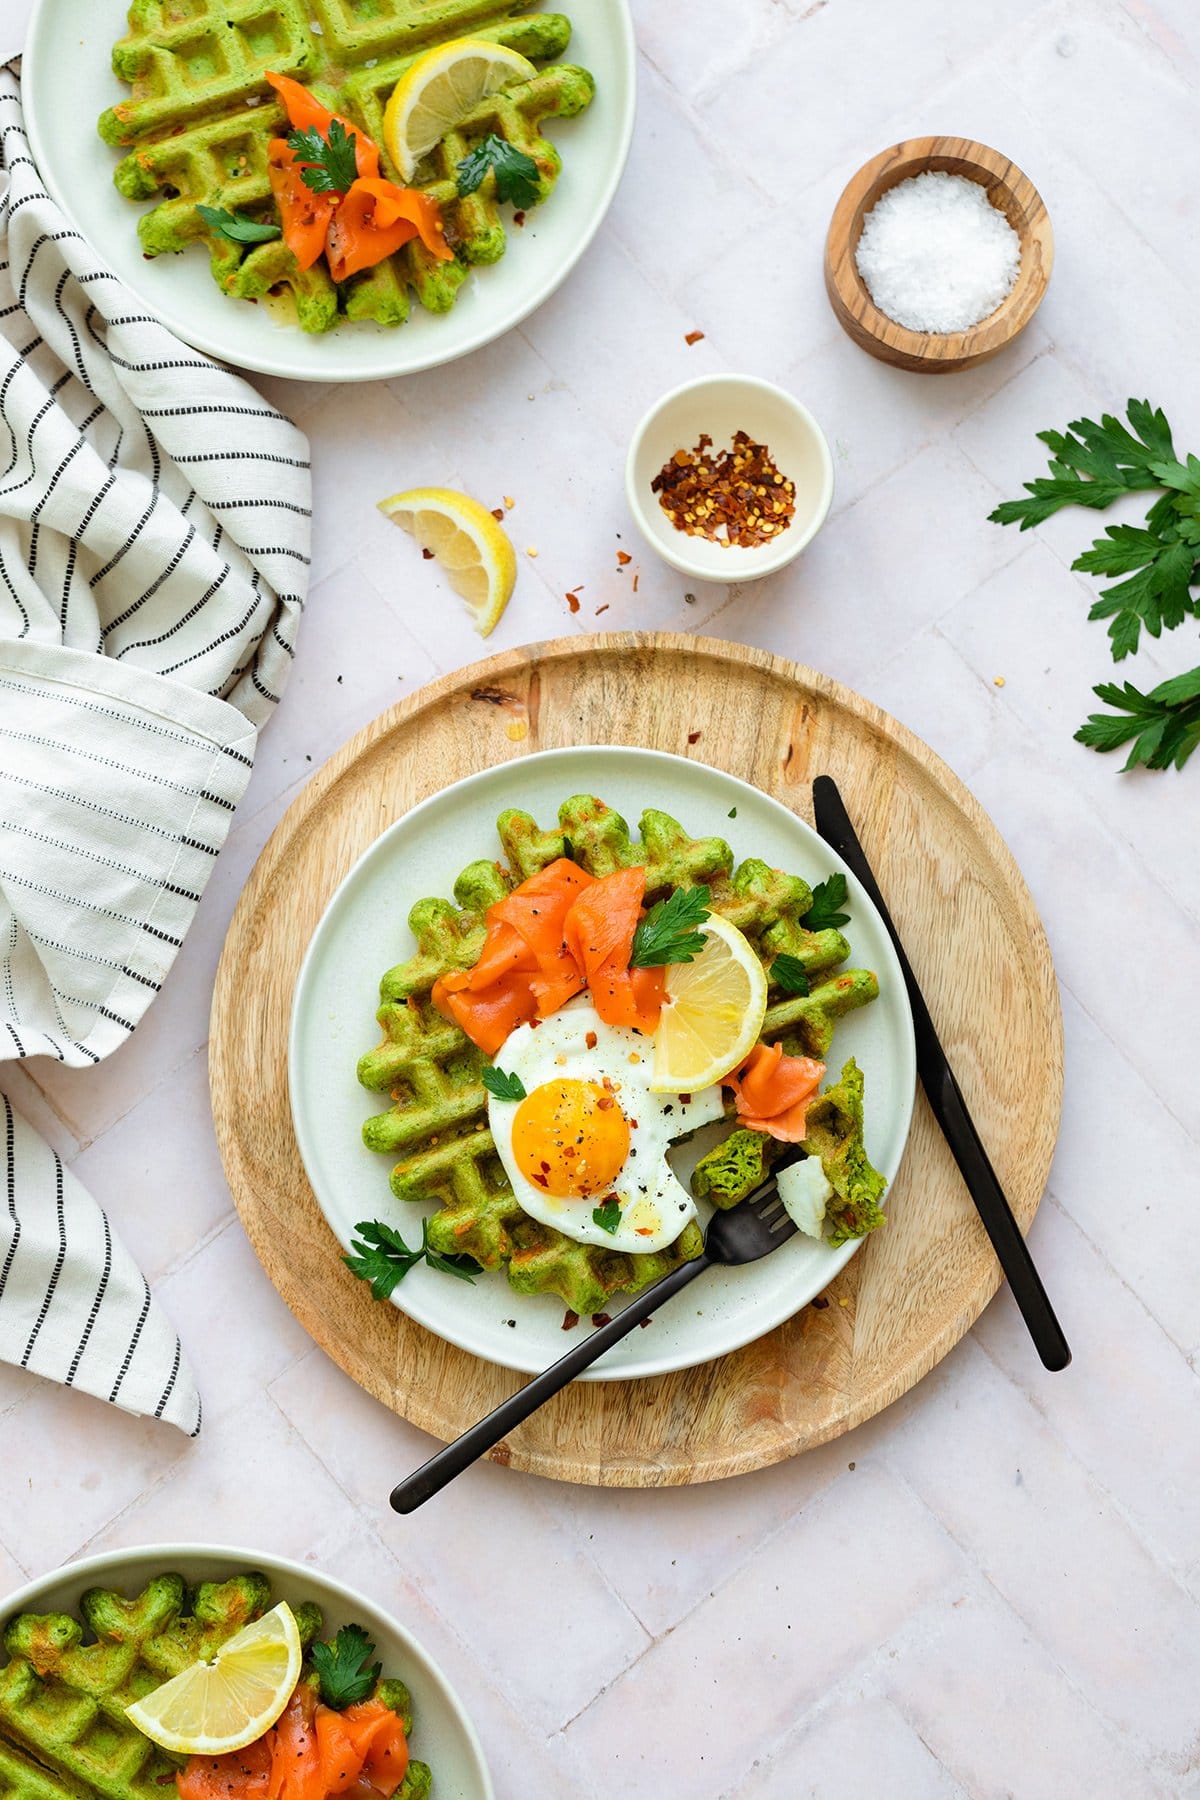 Green waffles on a white plate topped with a sunny side up egg that's been cut into, smoked salmon, fresh parsley, and a wedge of lemon.